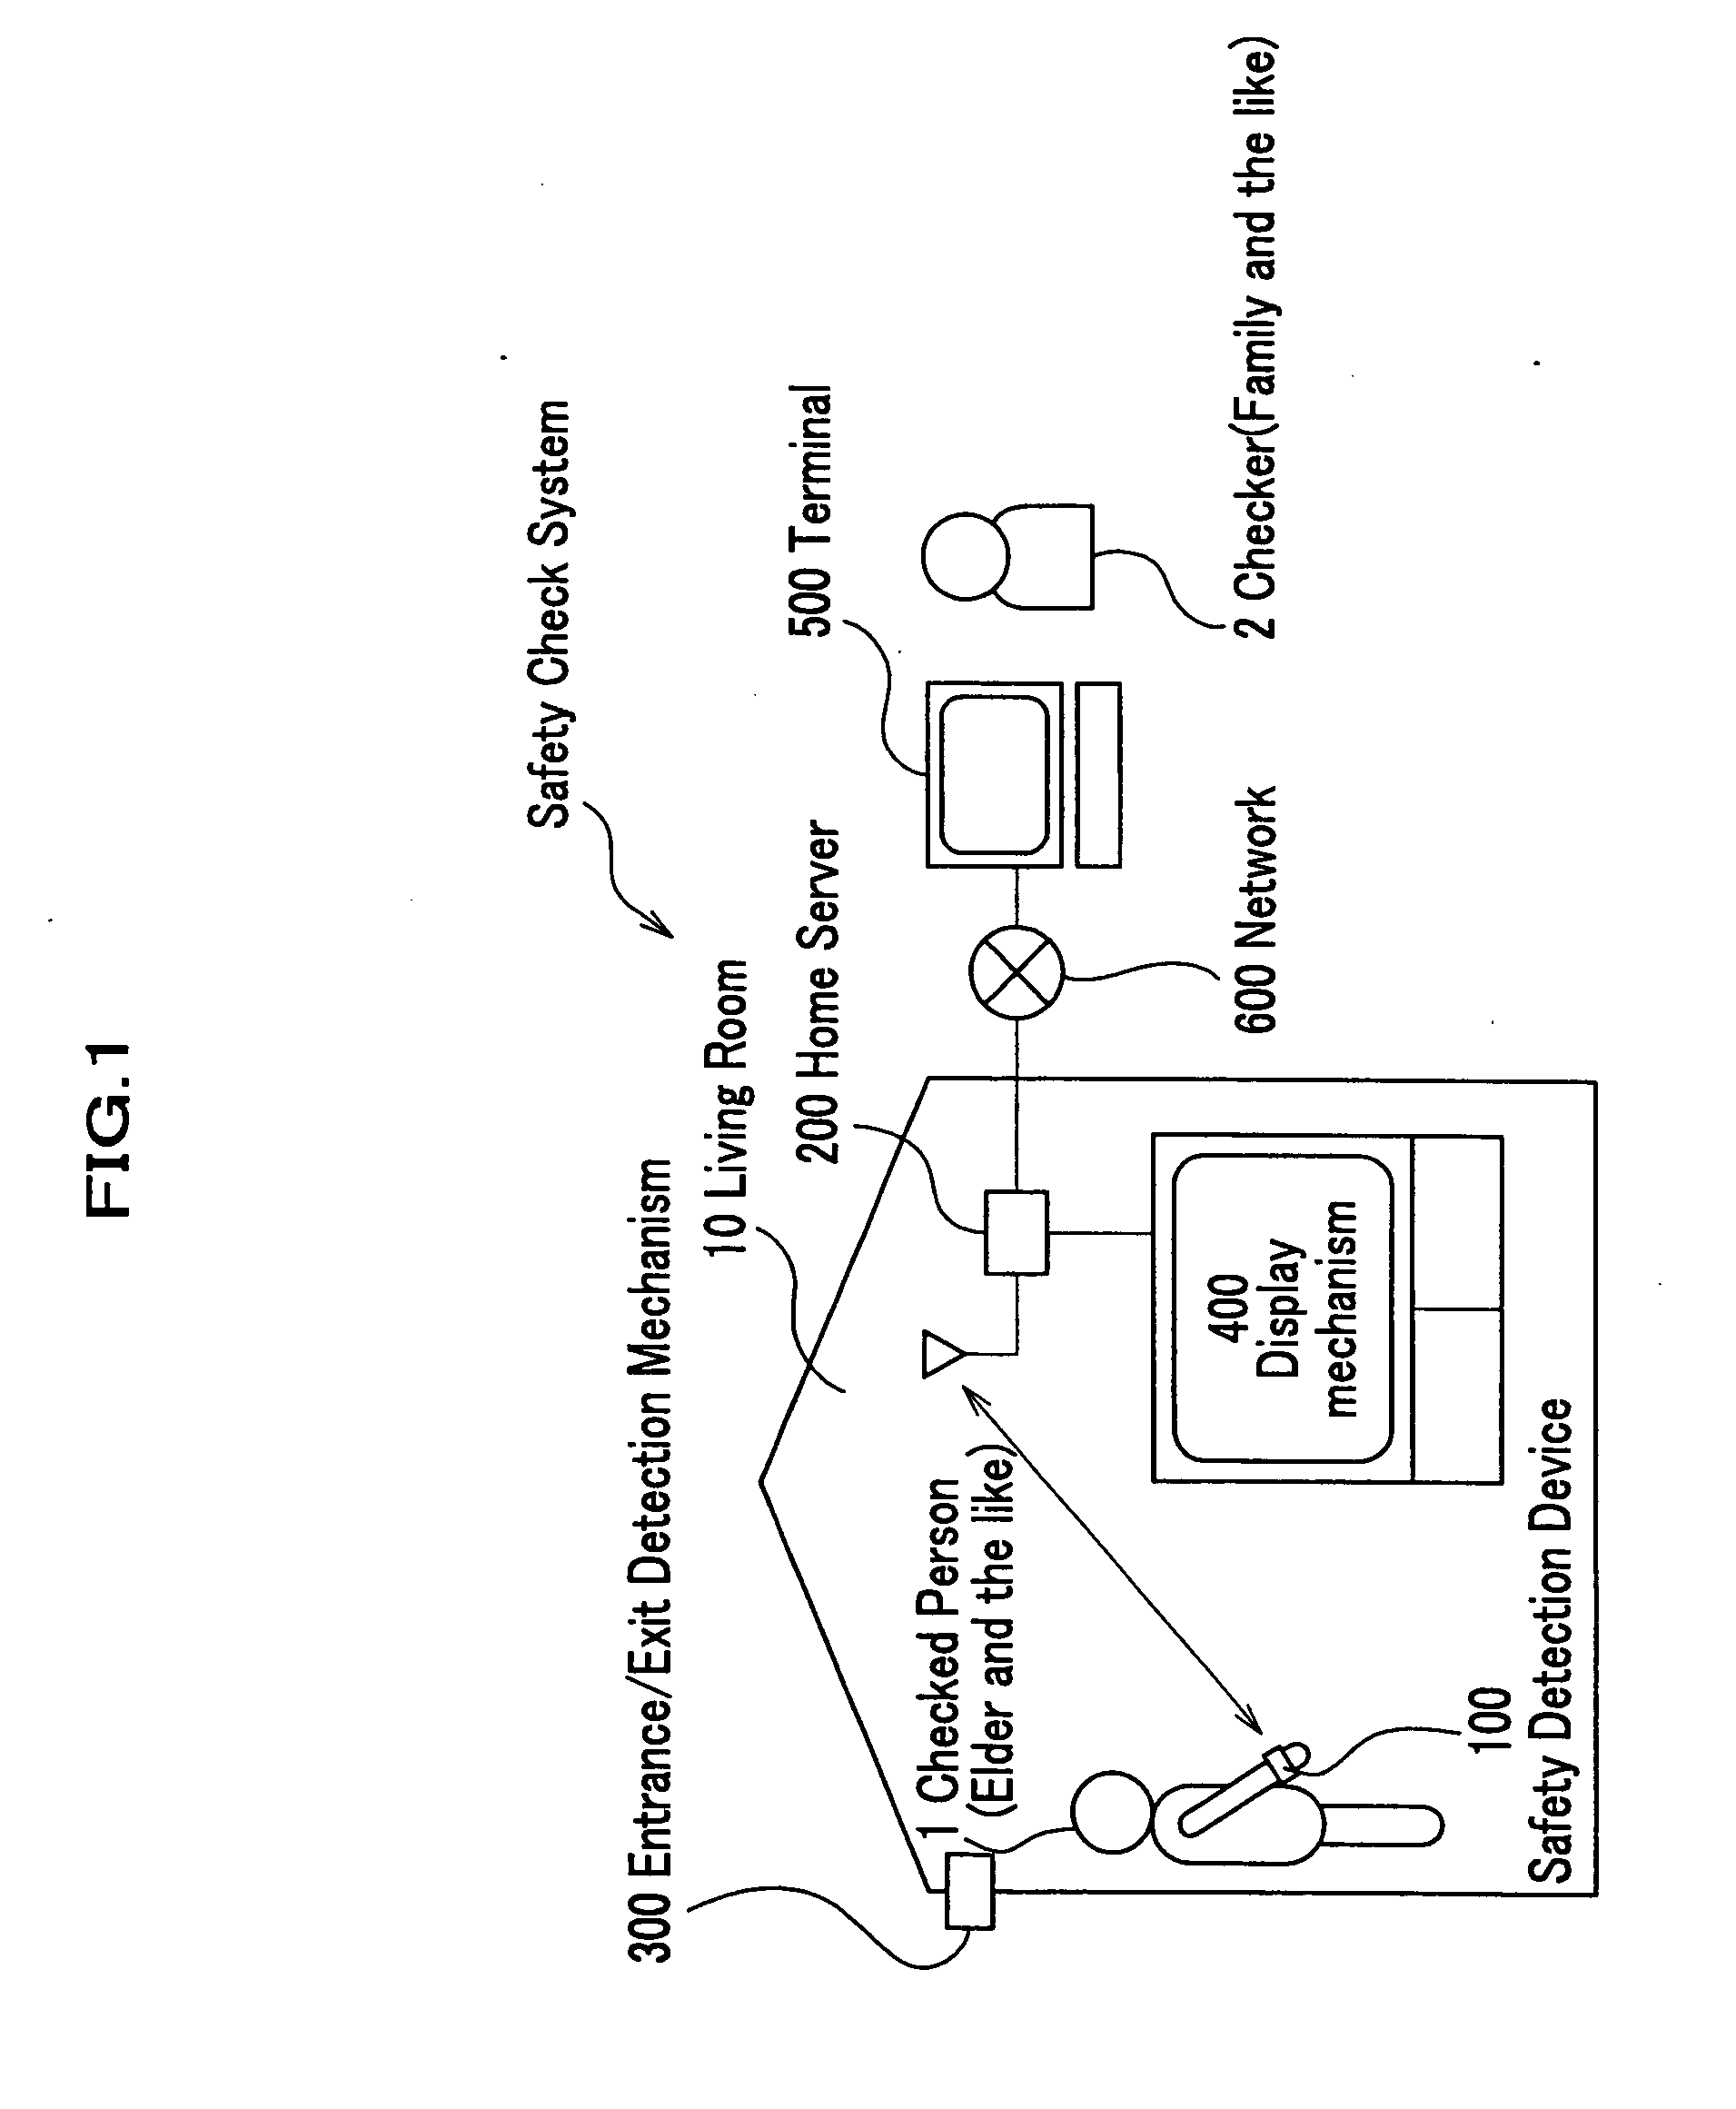 Safety check system, method, and program, and memory medium for memorizing program therefor